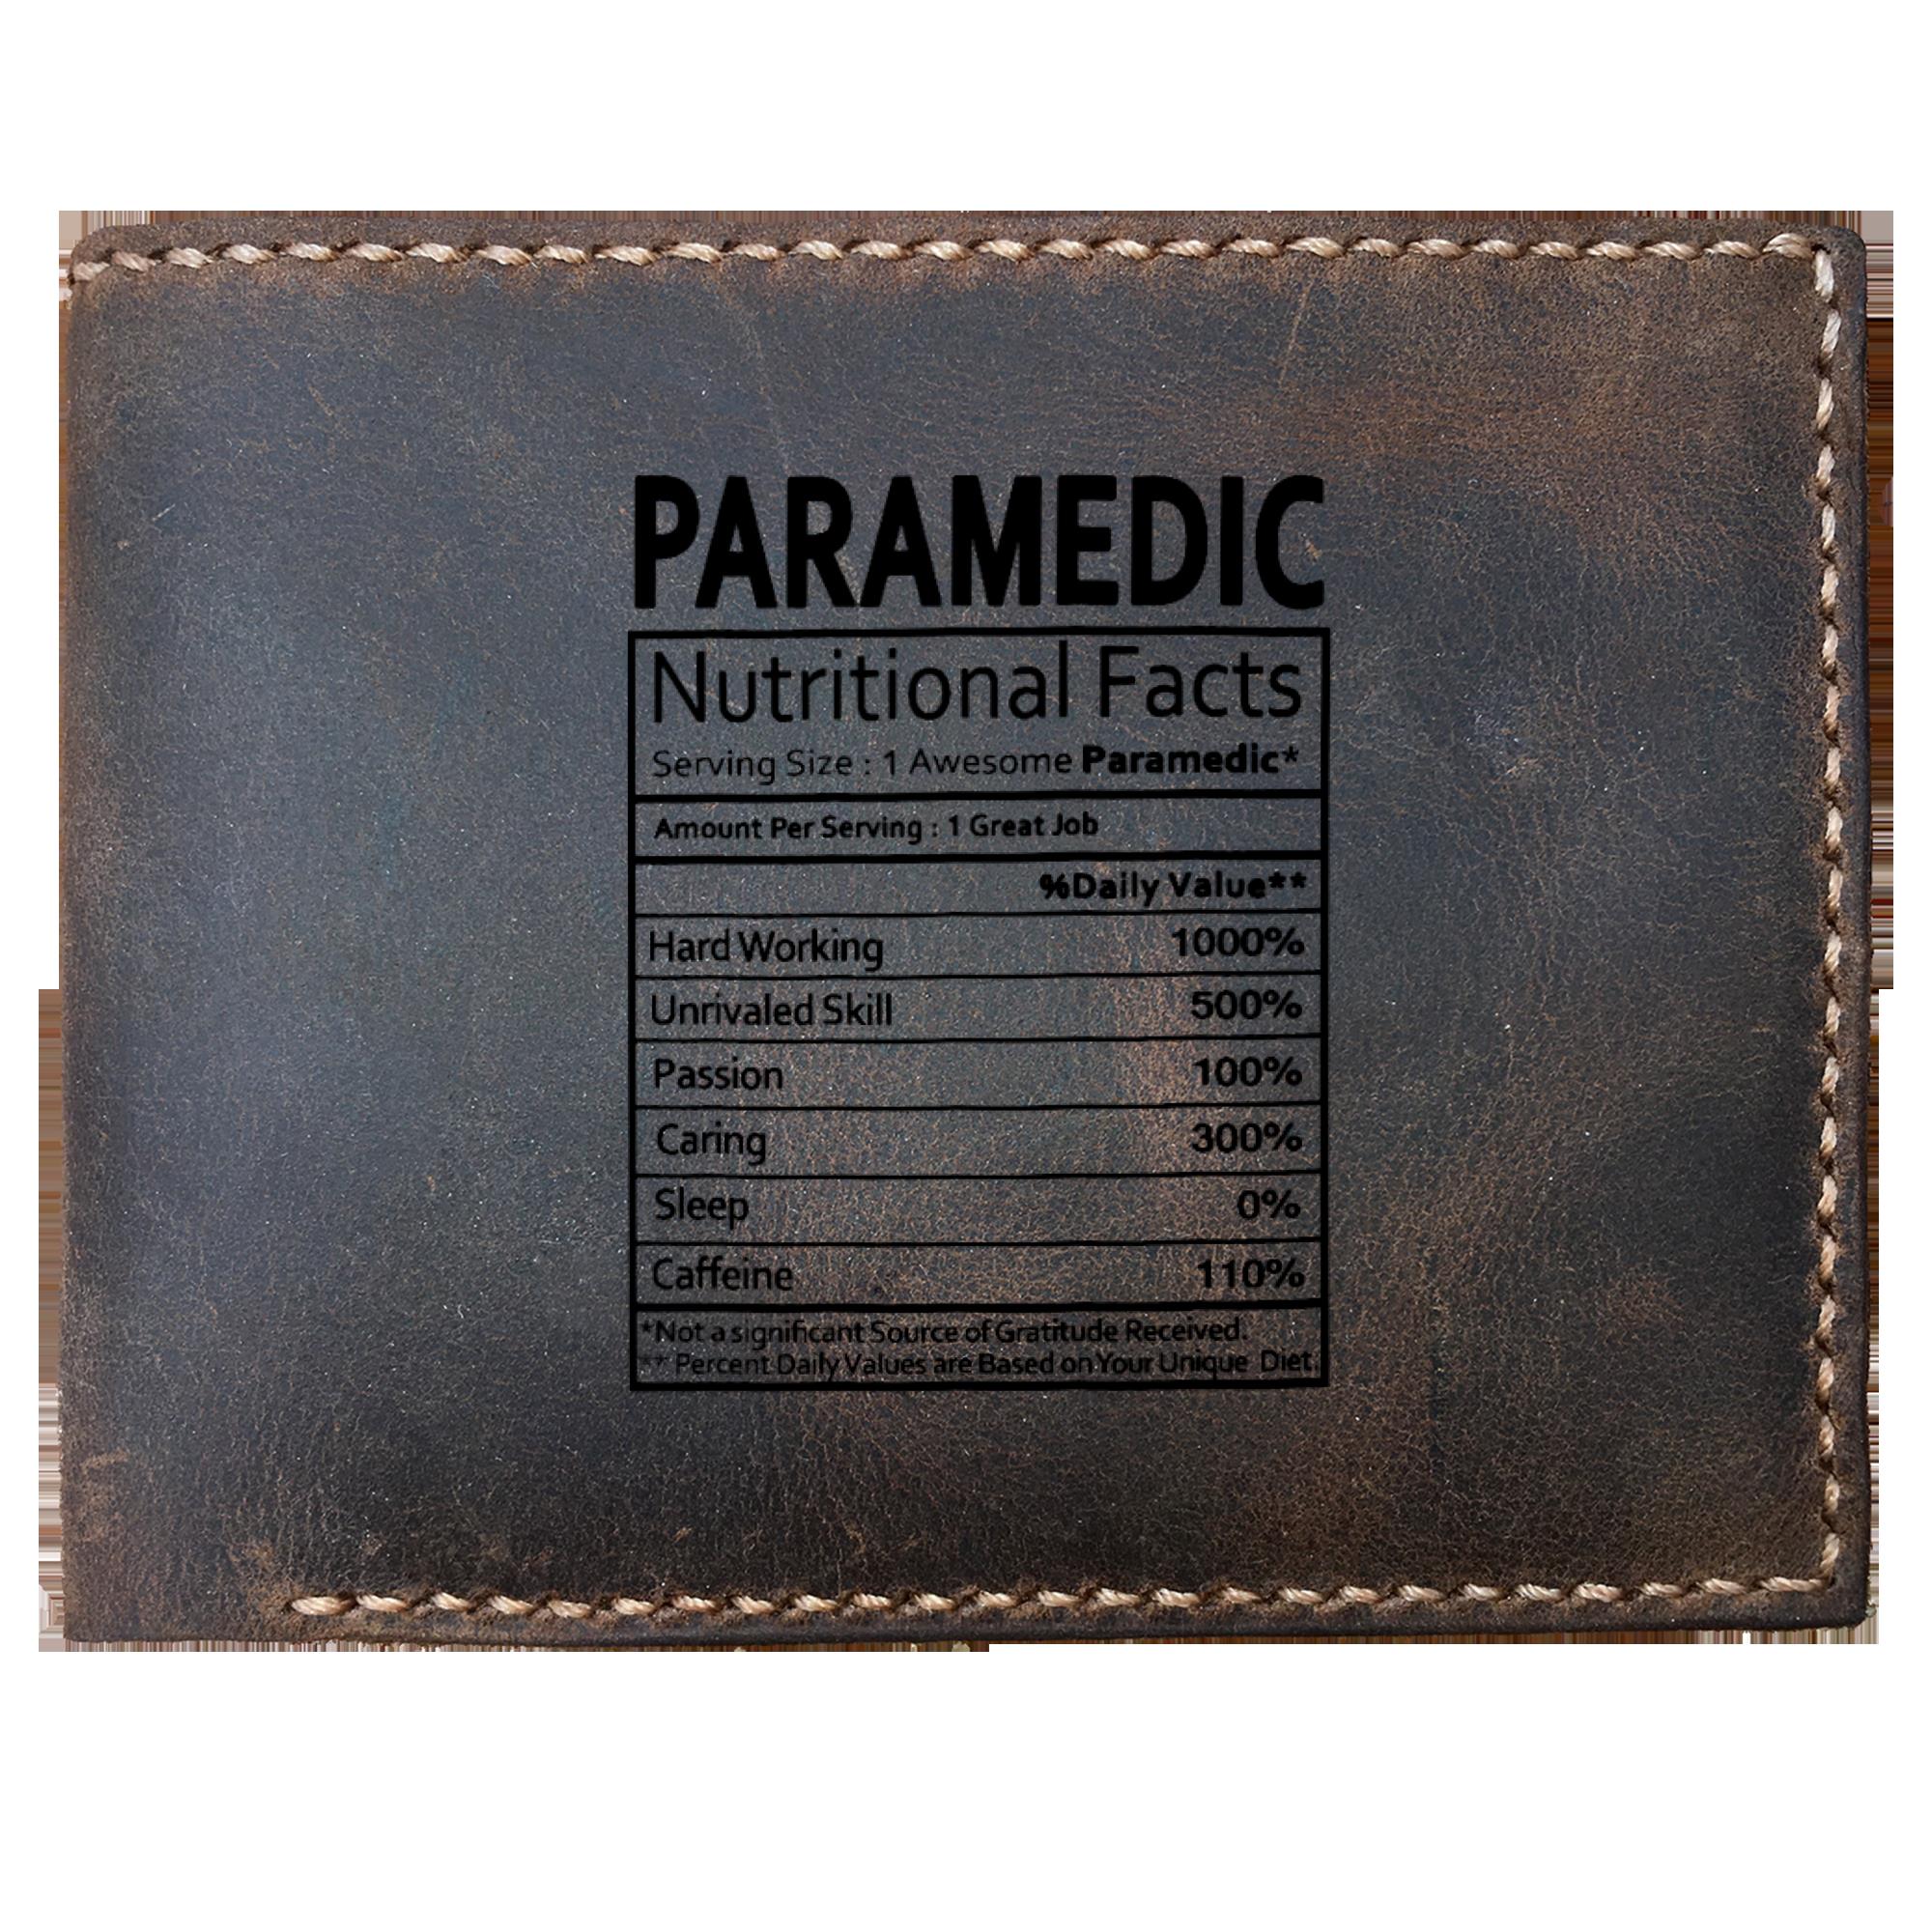 Skitongifts Funny Custom Laser Engraved Bifold Leather Wallet For Men, Paramedic Nutritional Facts